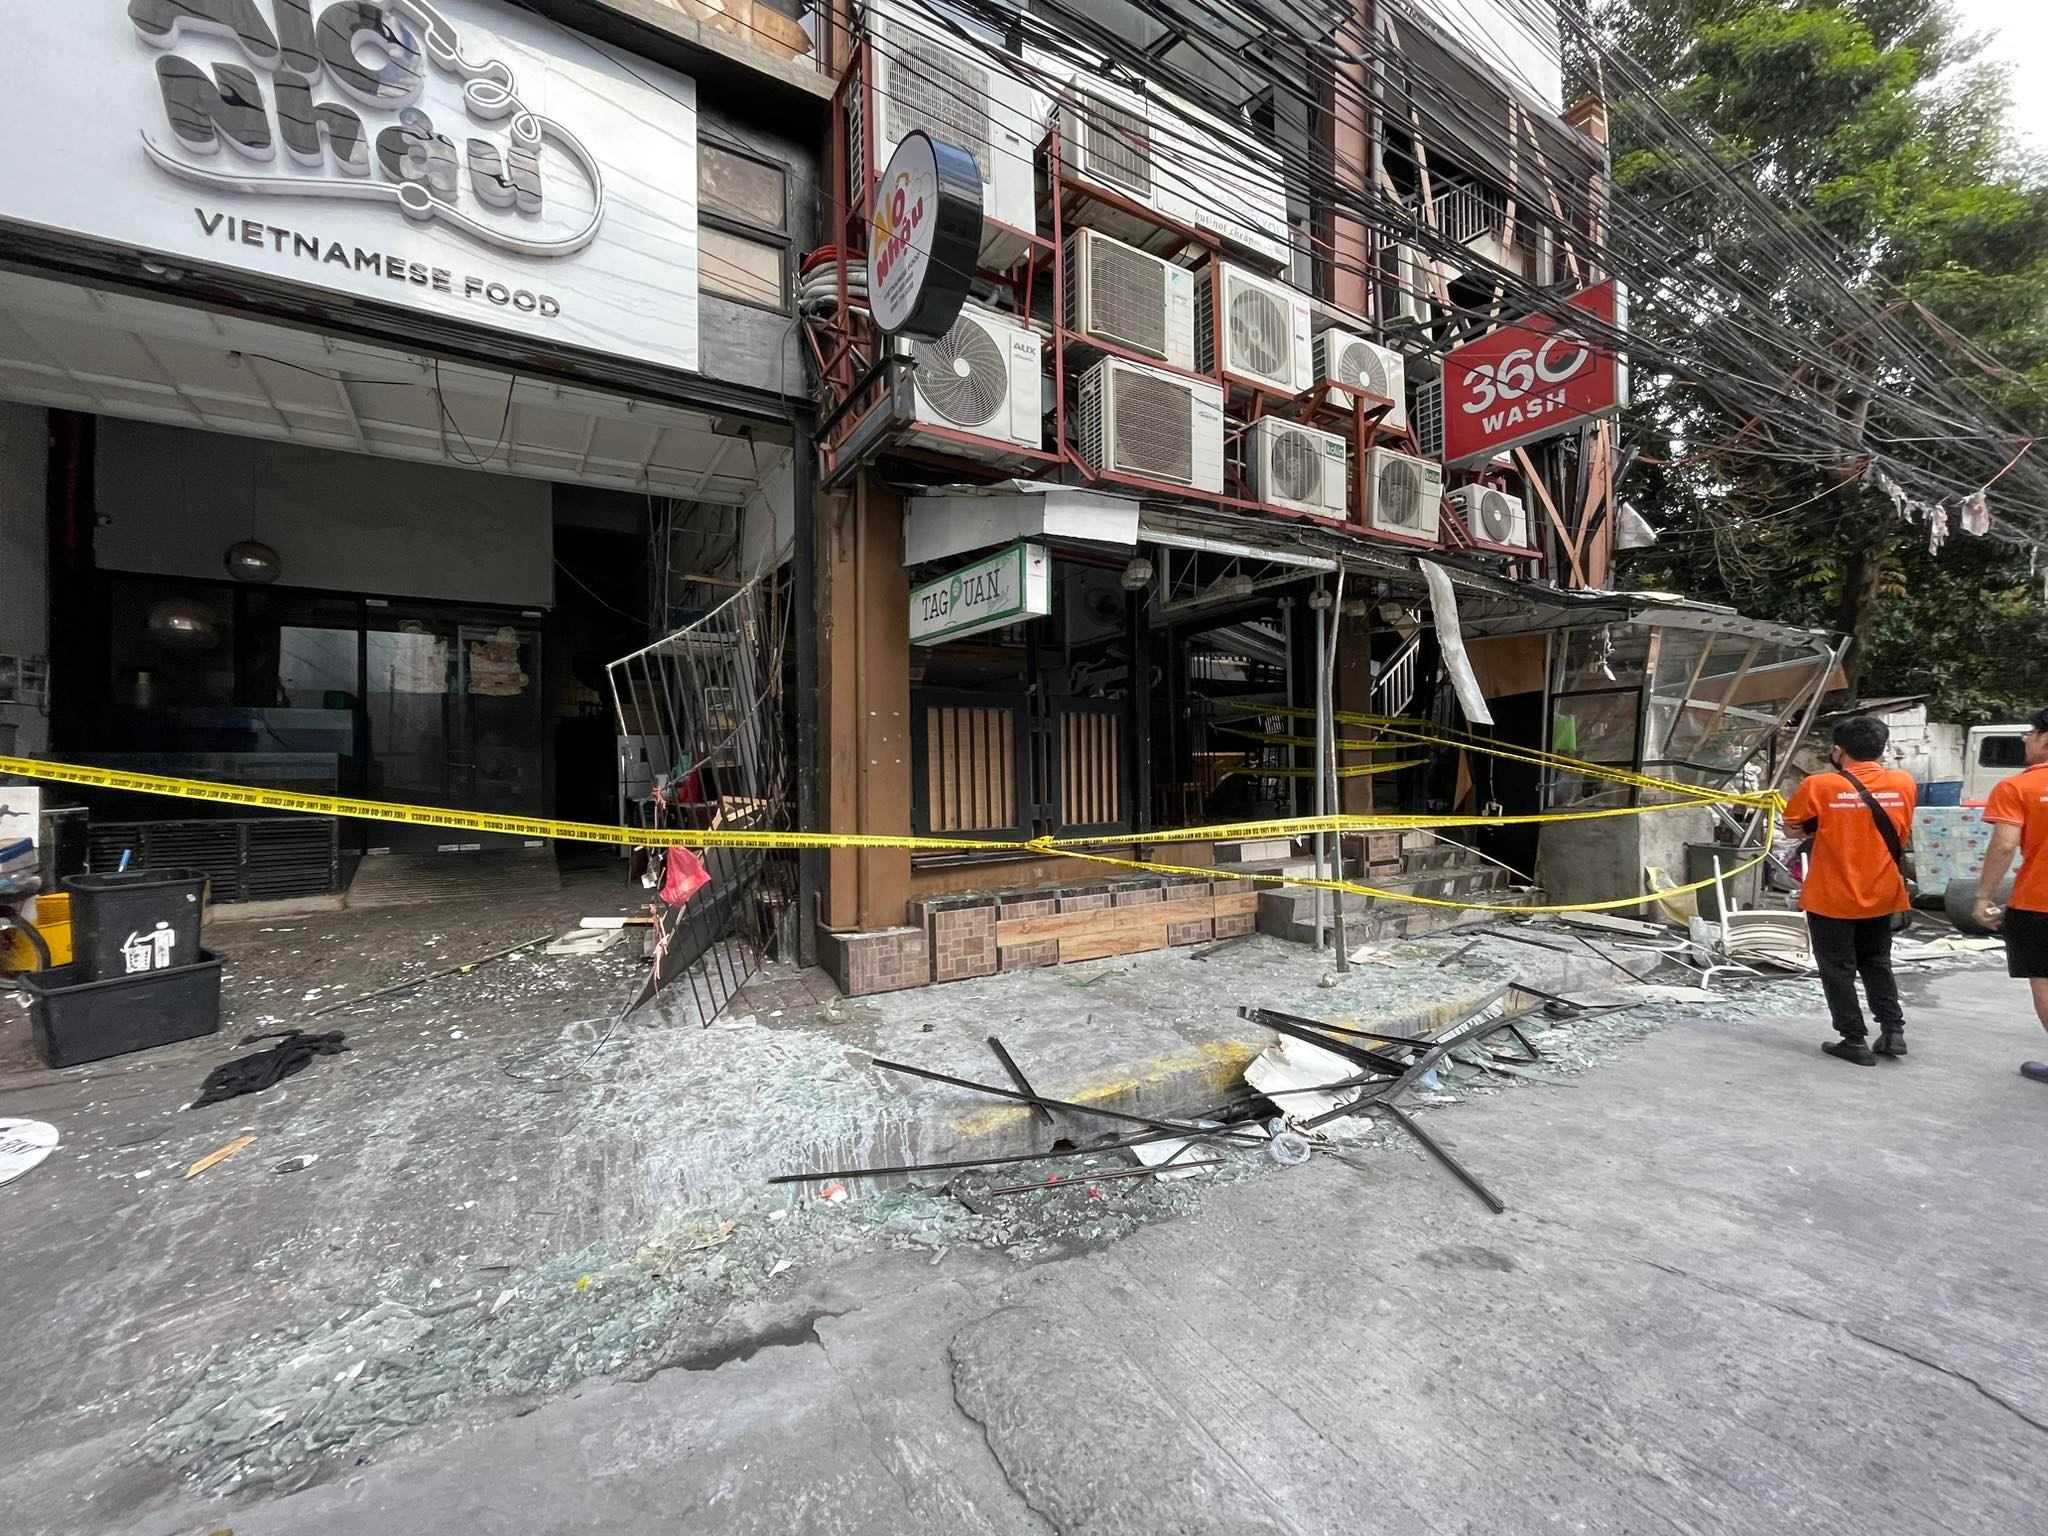 16 injured as LPG tank explodes inside laundry shop in Malate, Manila